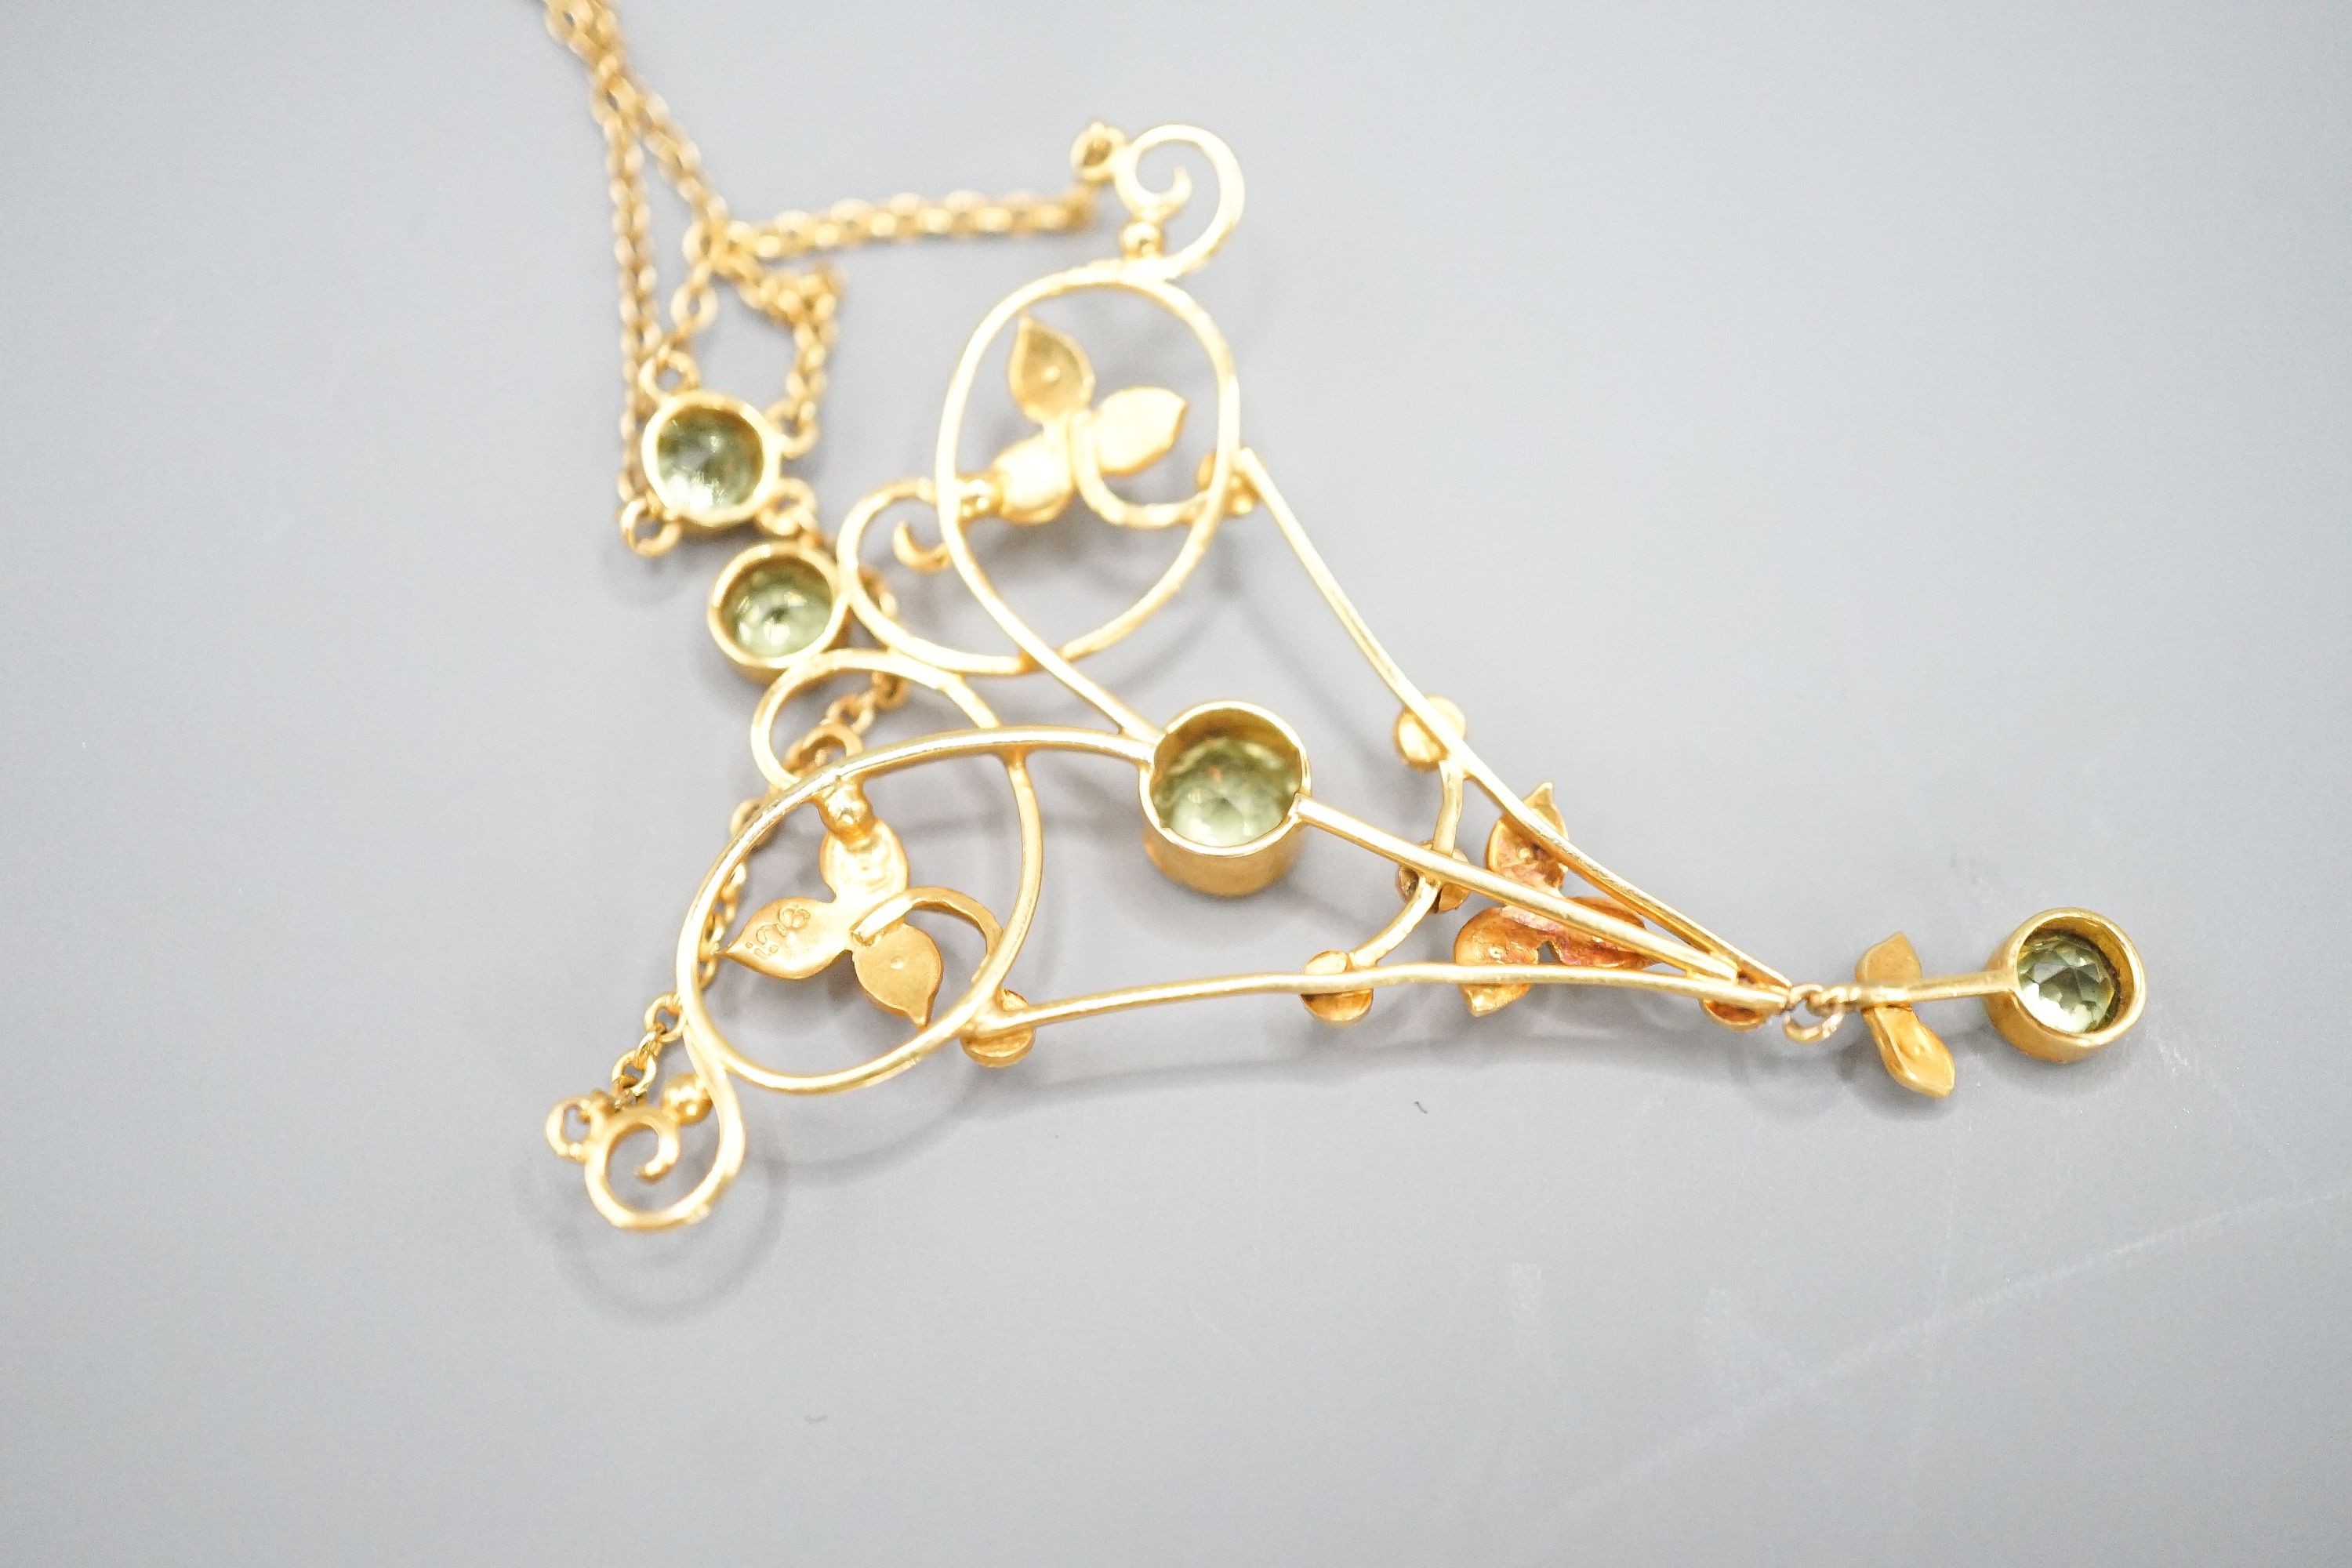 An Edwardian 9c yellow metal peridot seed pearl set pendant necklace, approx. 52cm overall, gross weight 4.4 grams.